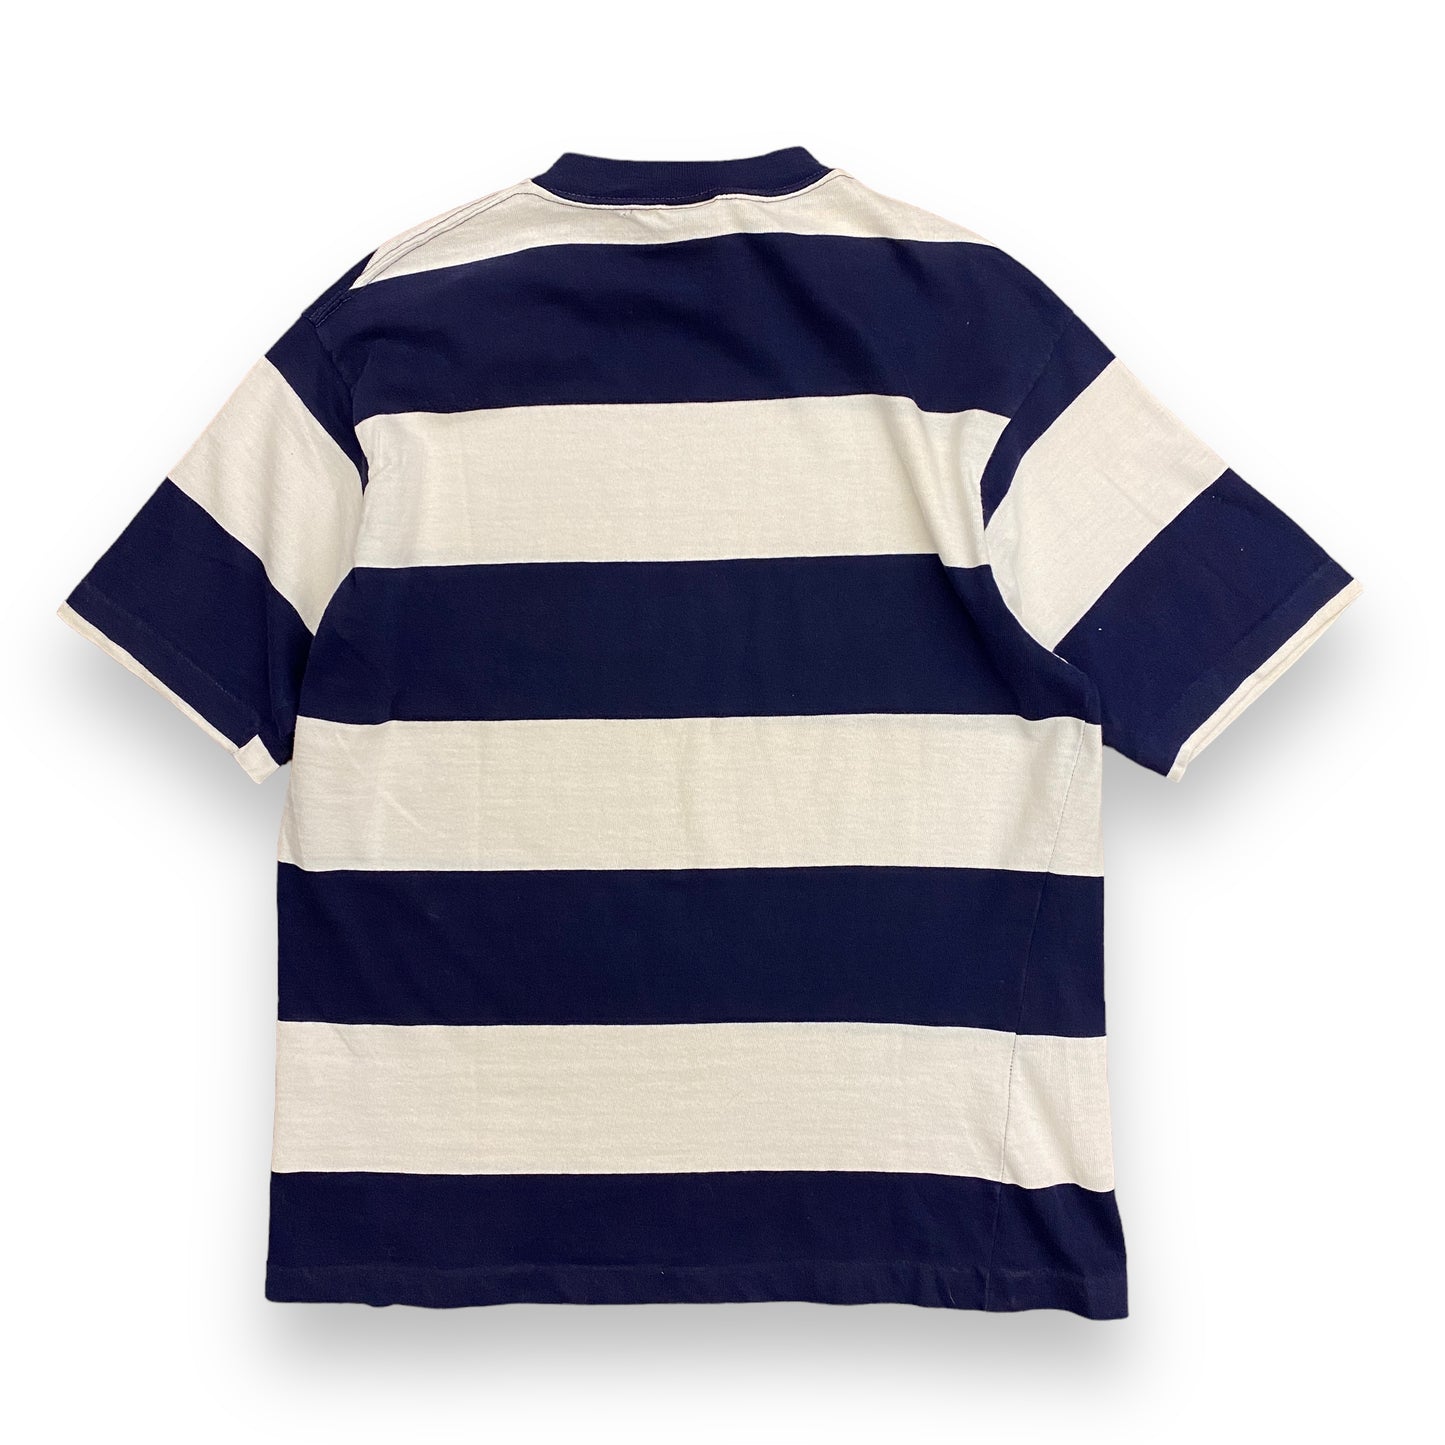 60s/70s Robert Bruce TNT Striped Tee - Size Large